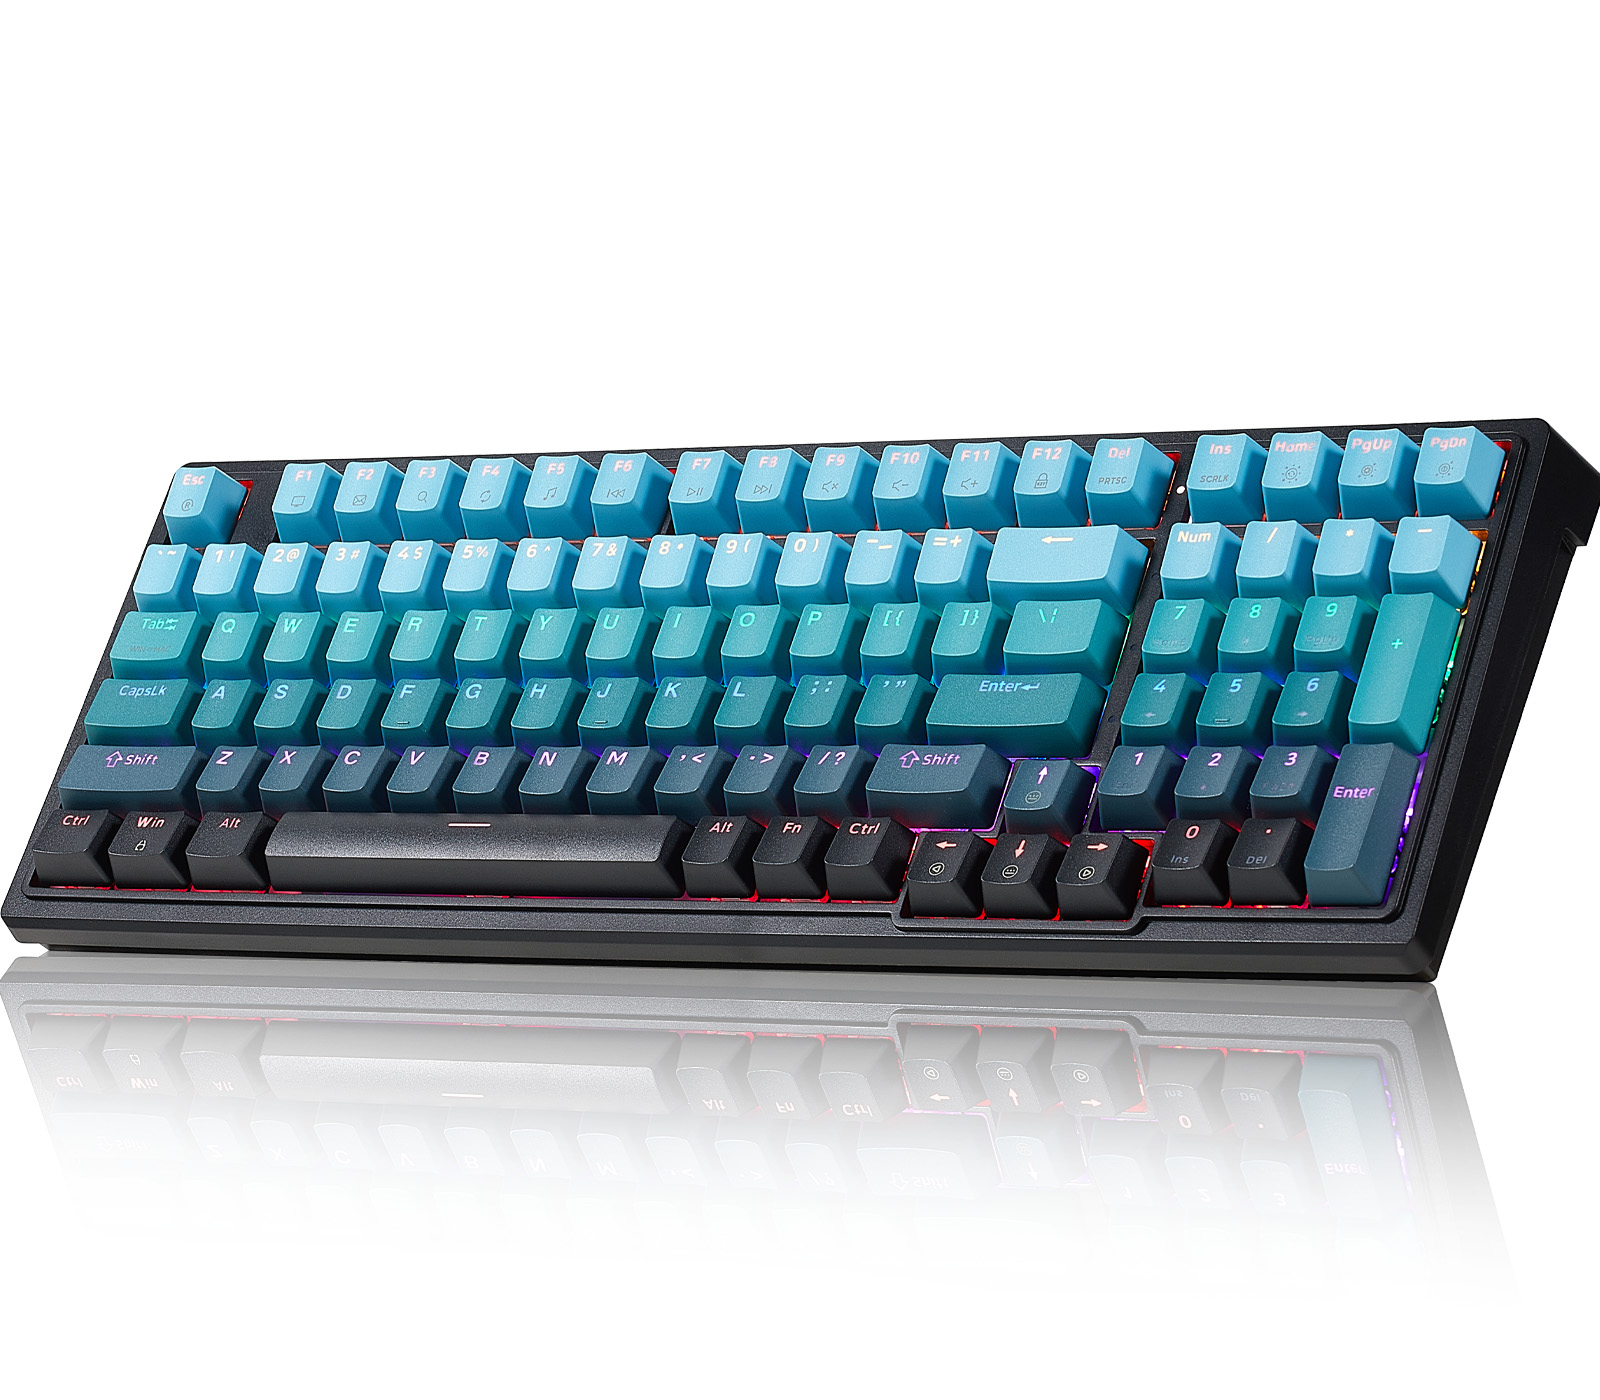 Hexgears M4 Mechanical Keyboard, 96% Gaming Keyboard 99 Keys with Kailh Hot Swappable Switch(Linear)